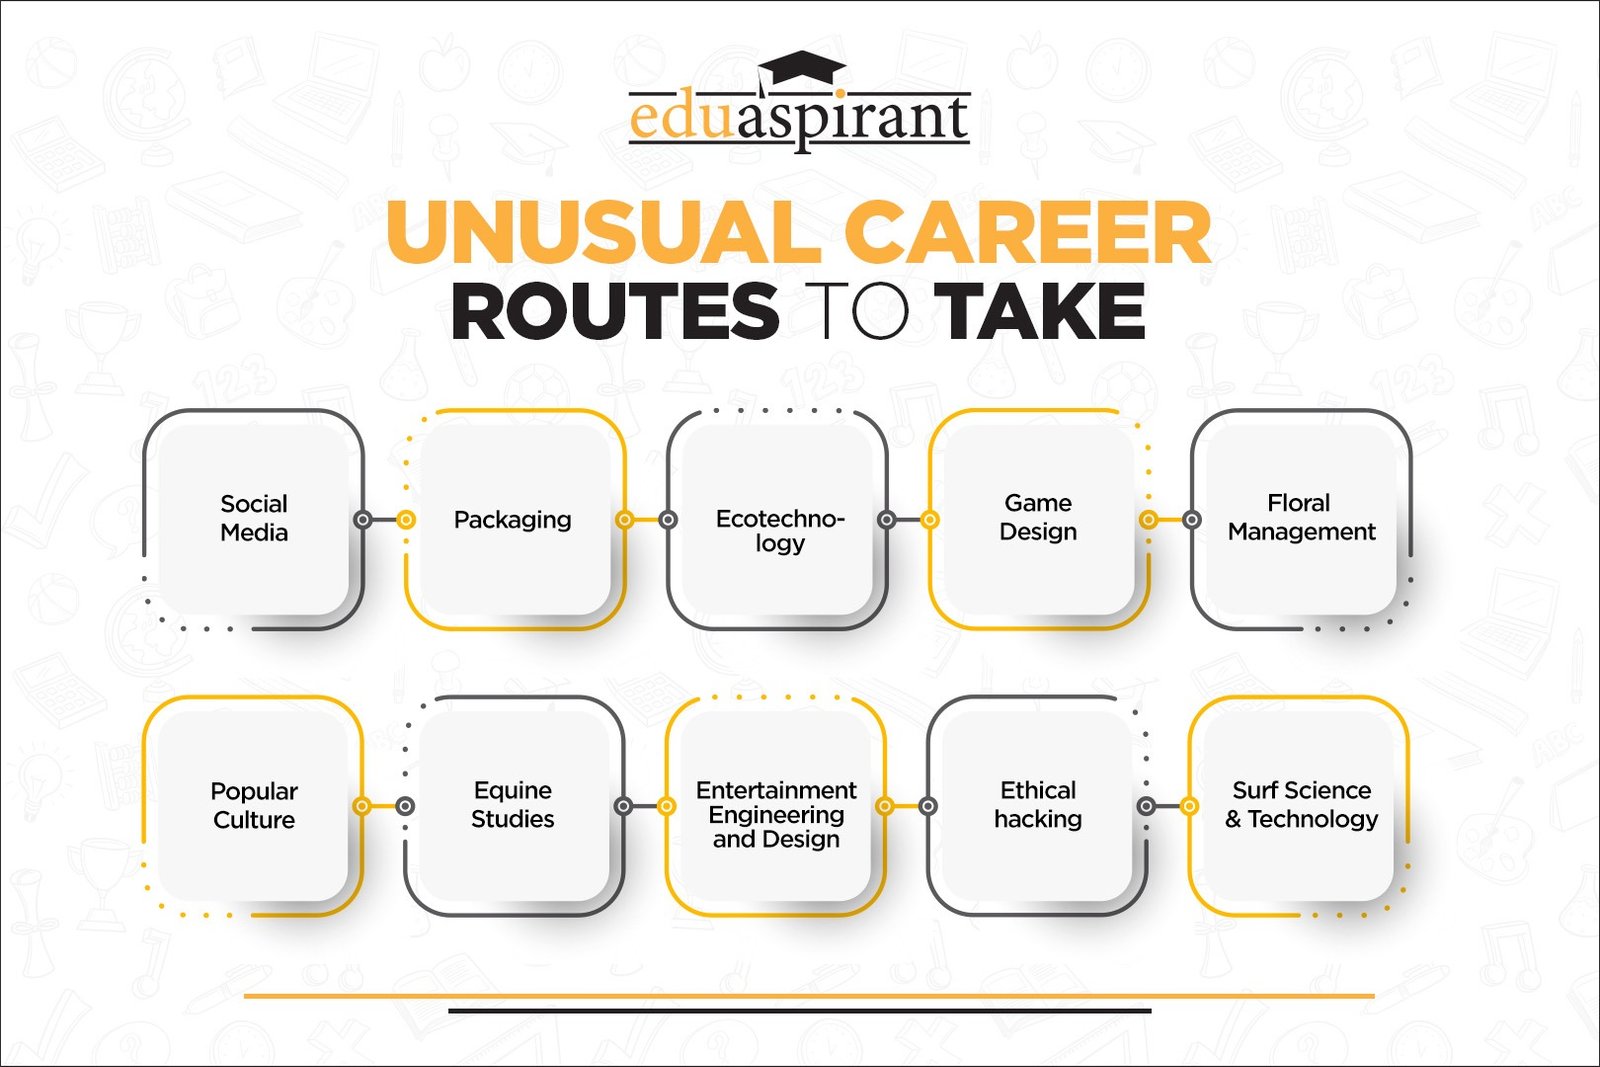 career routes